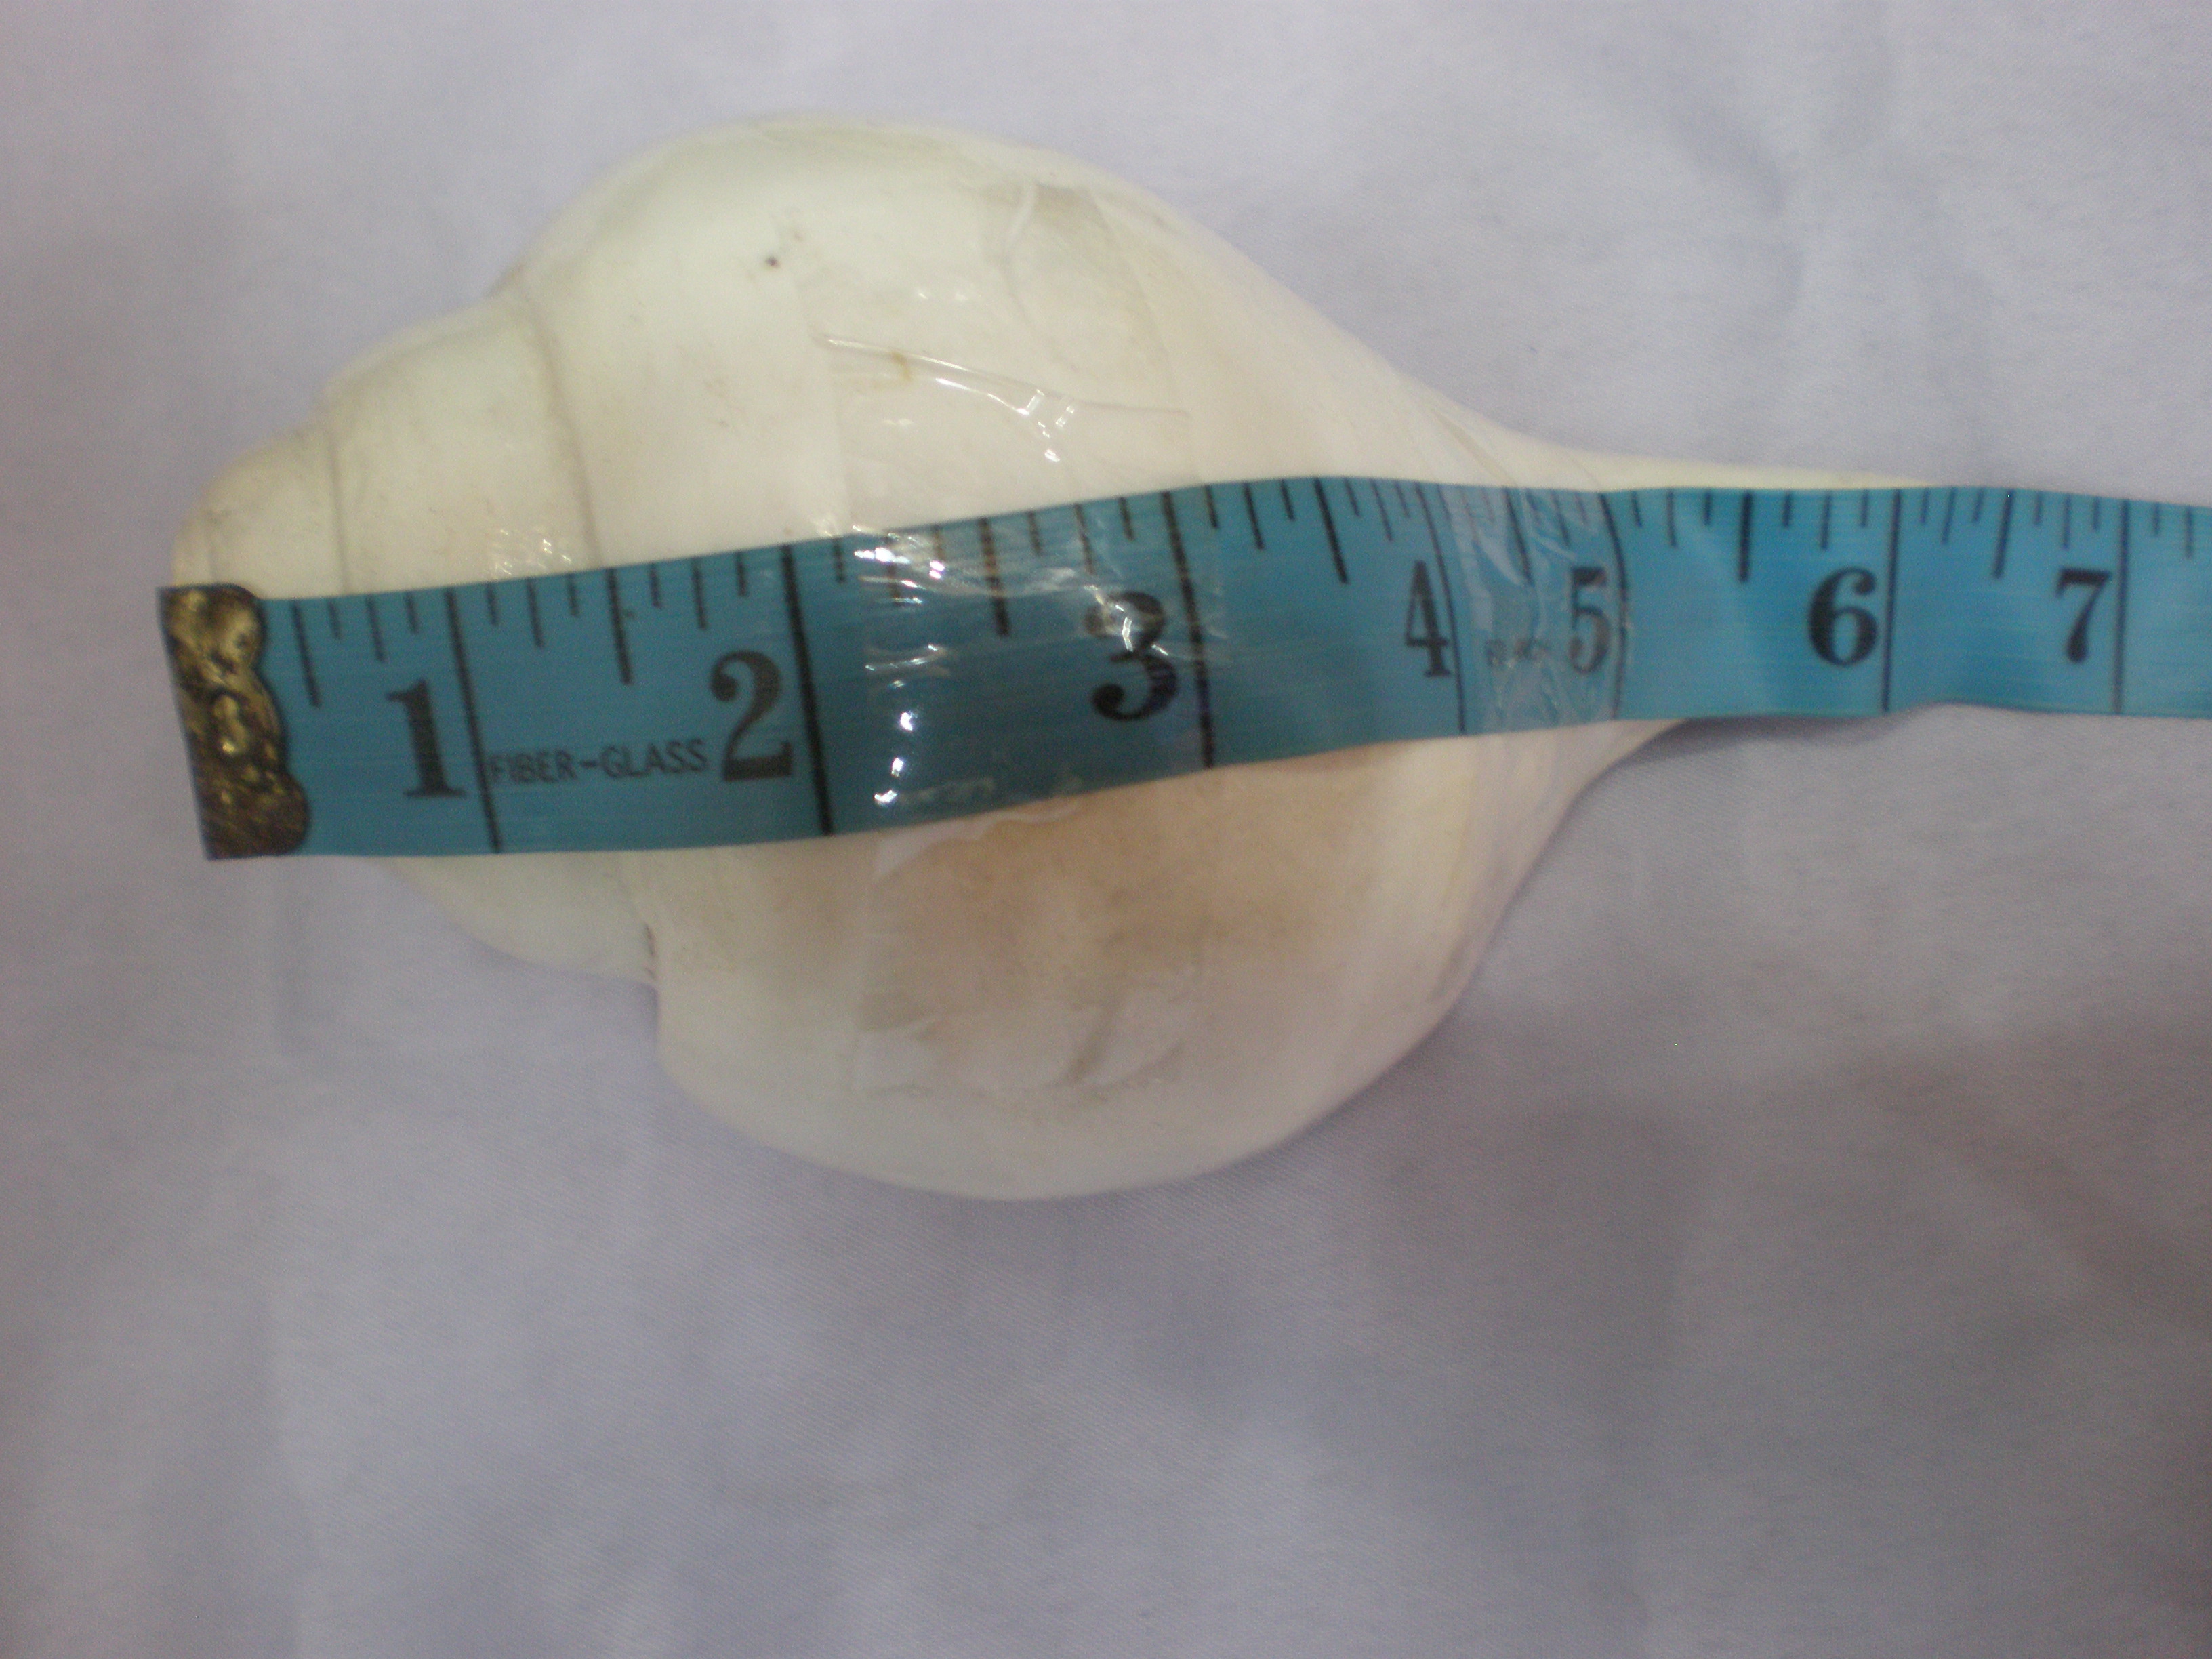 measureing a blowing conch 2